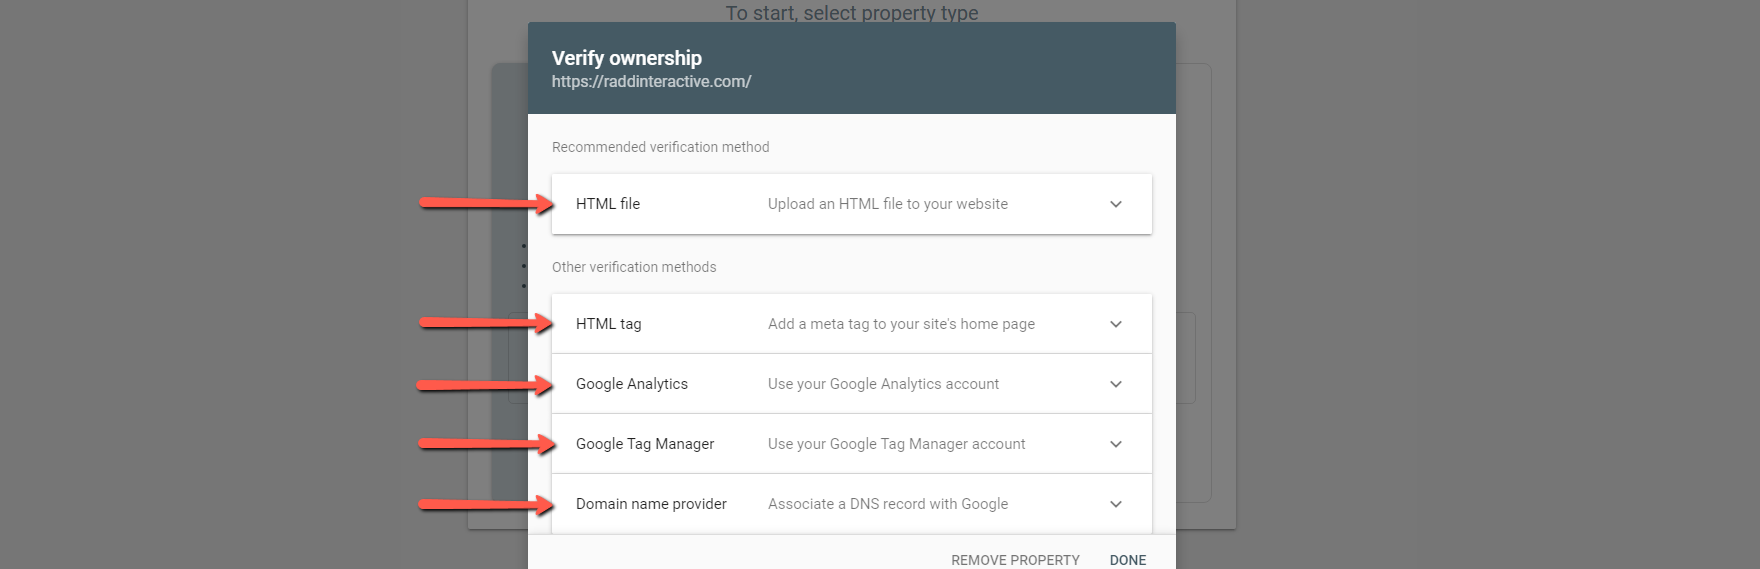 A screenshot showing the different options for verifying a URL prefix property in Search Console